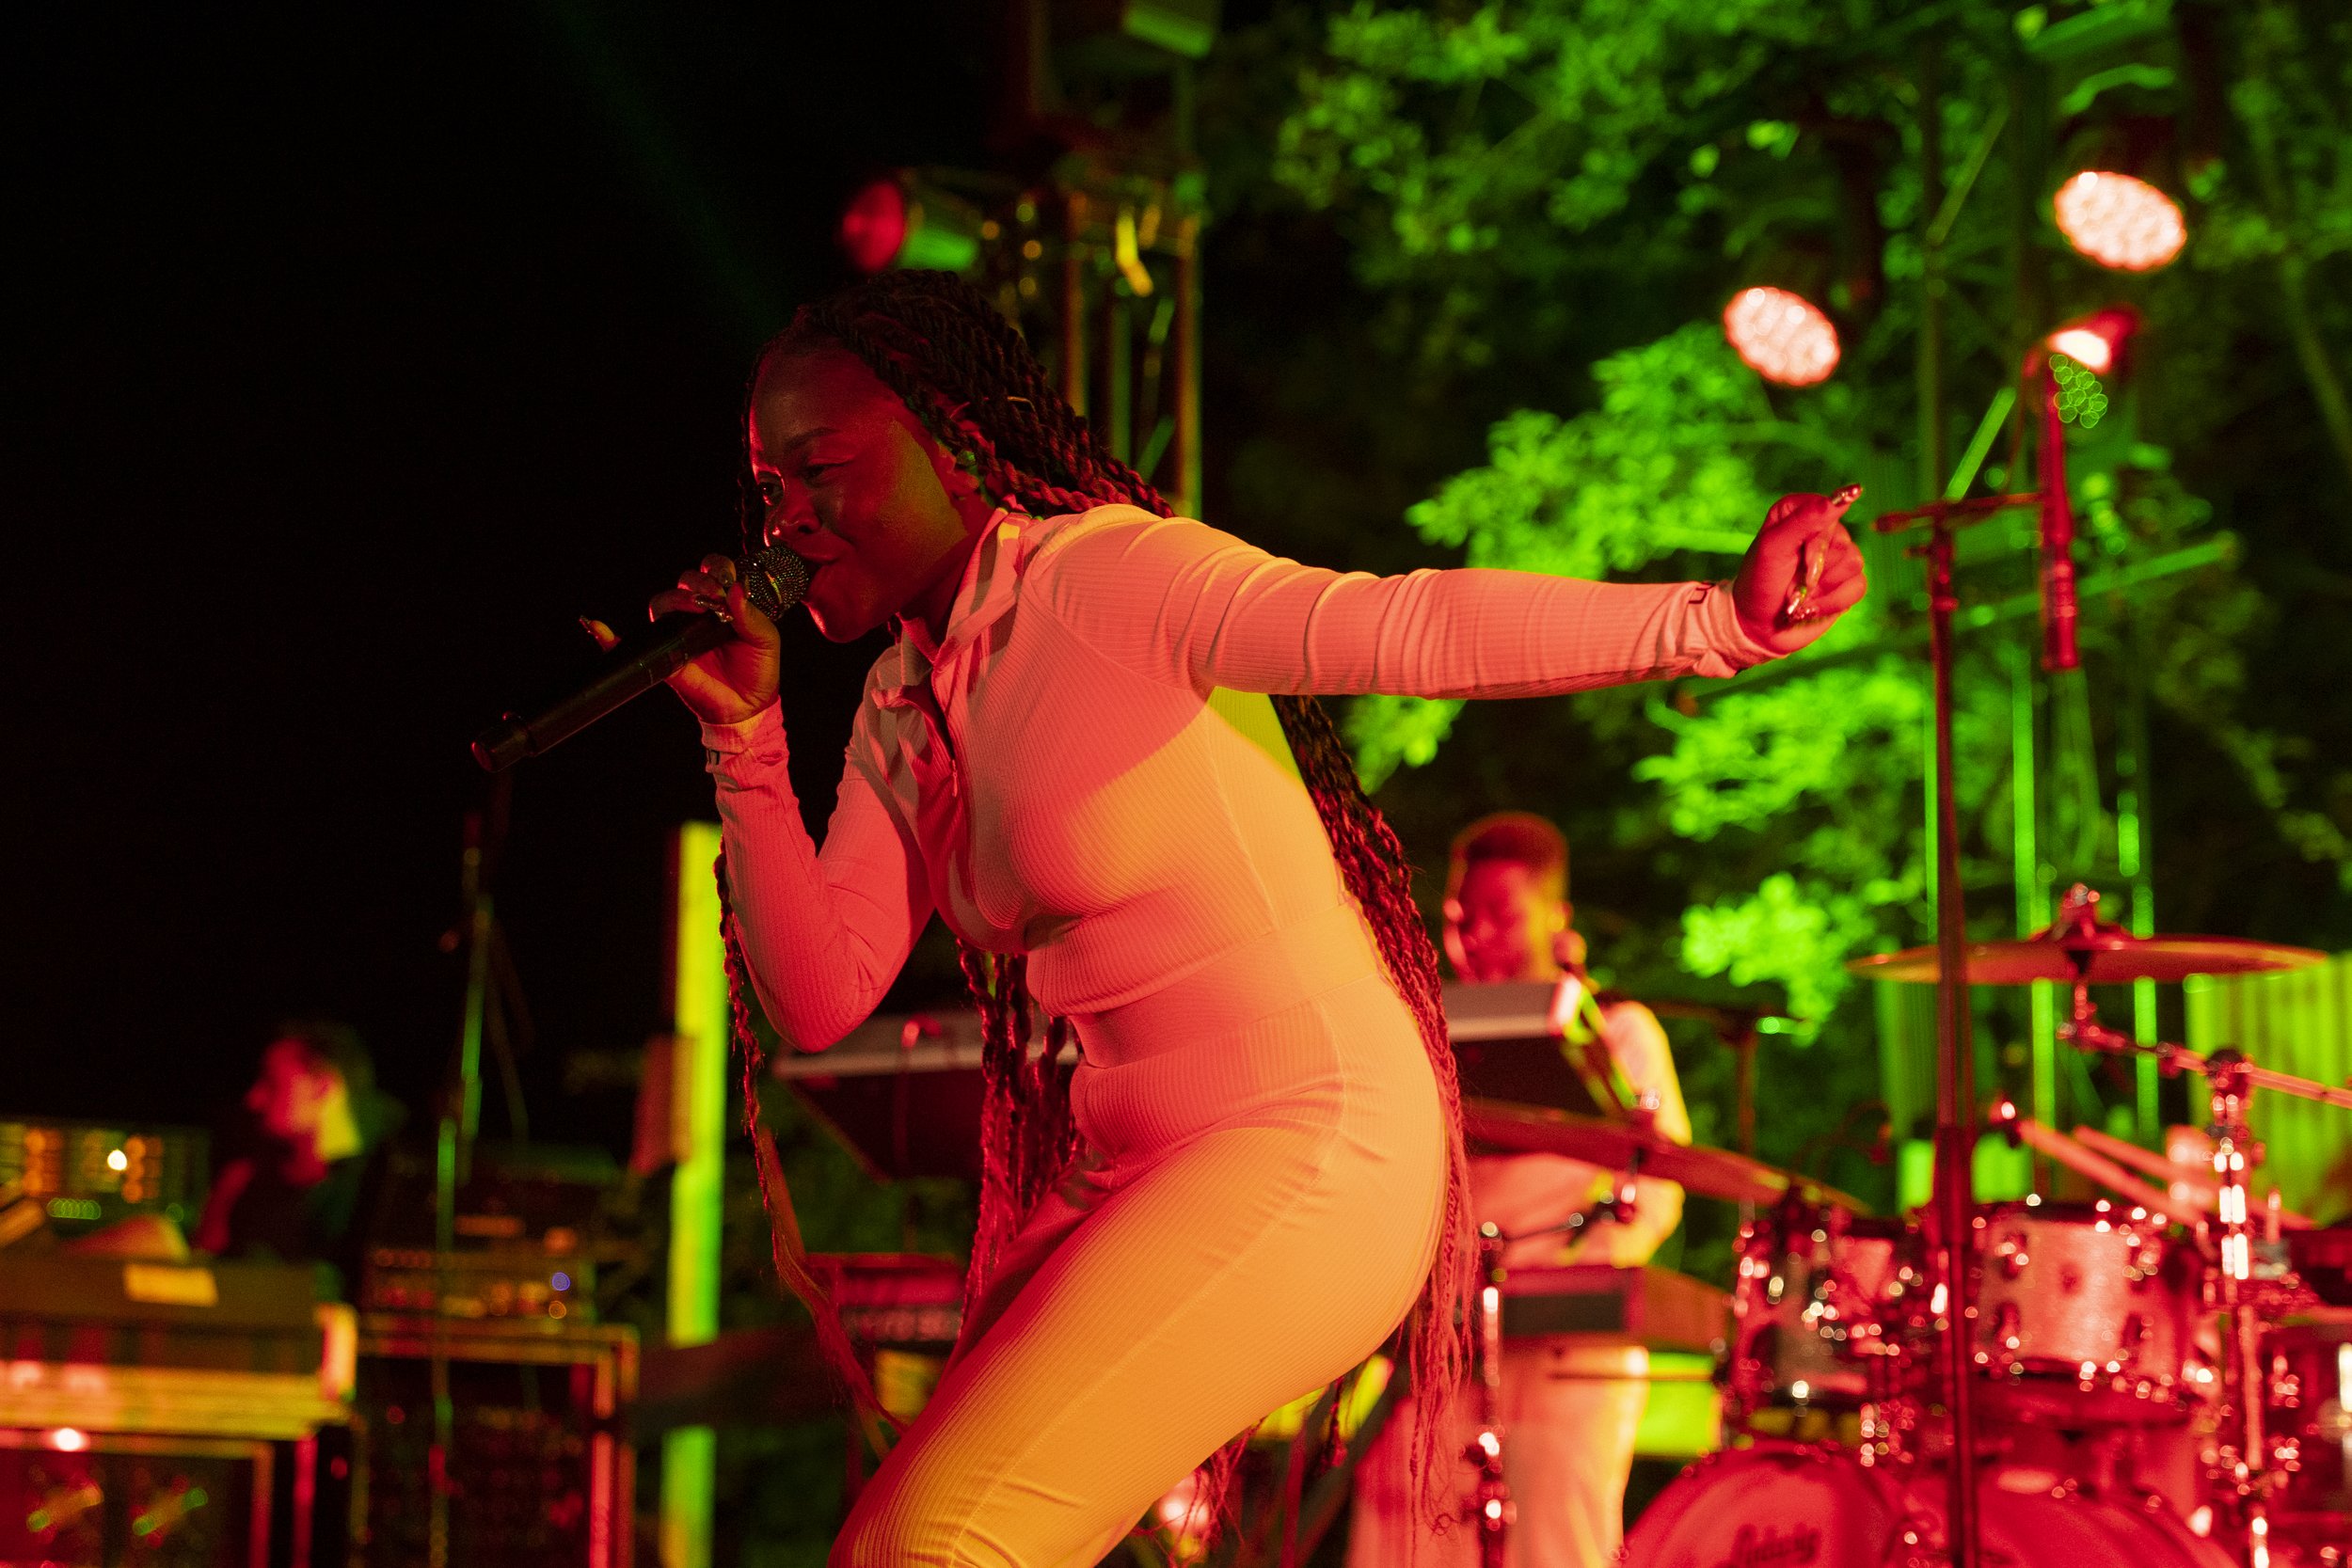  Sampa the Great at Pickathon for The Willamette Week 